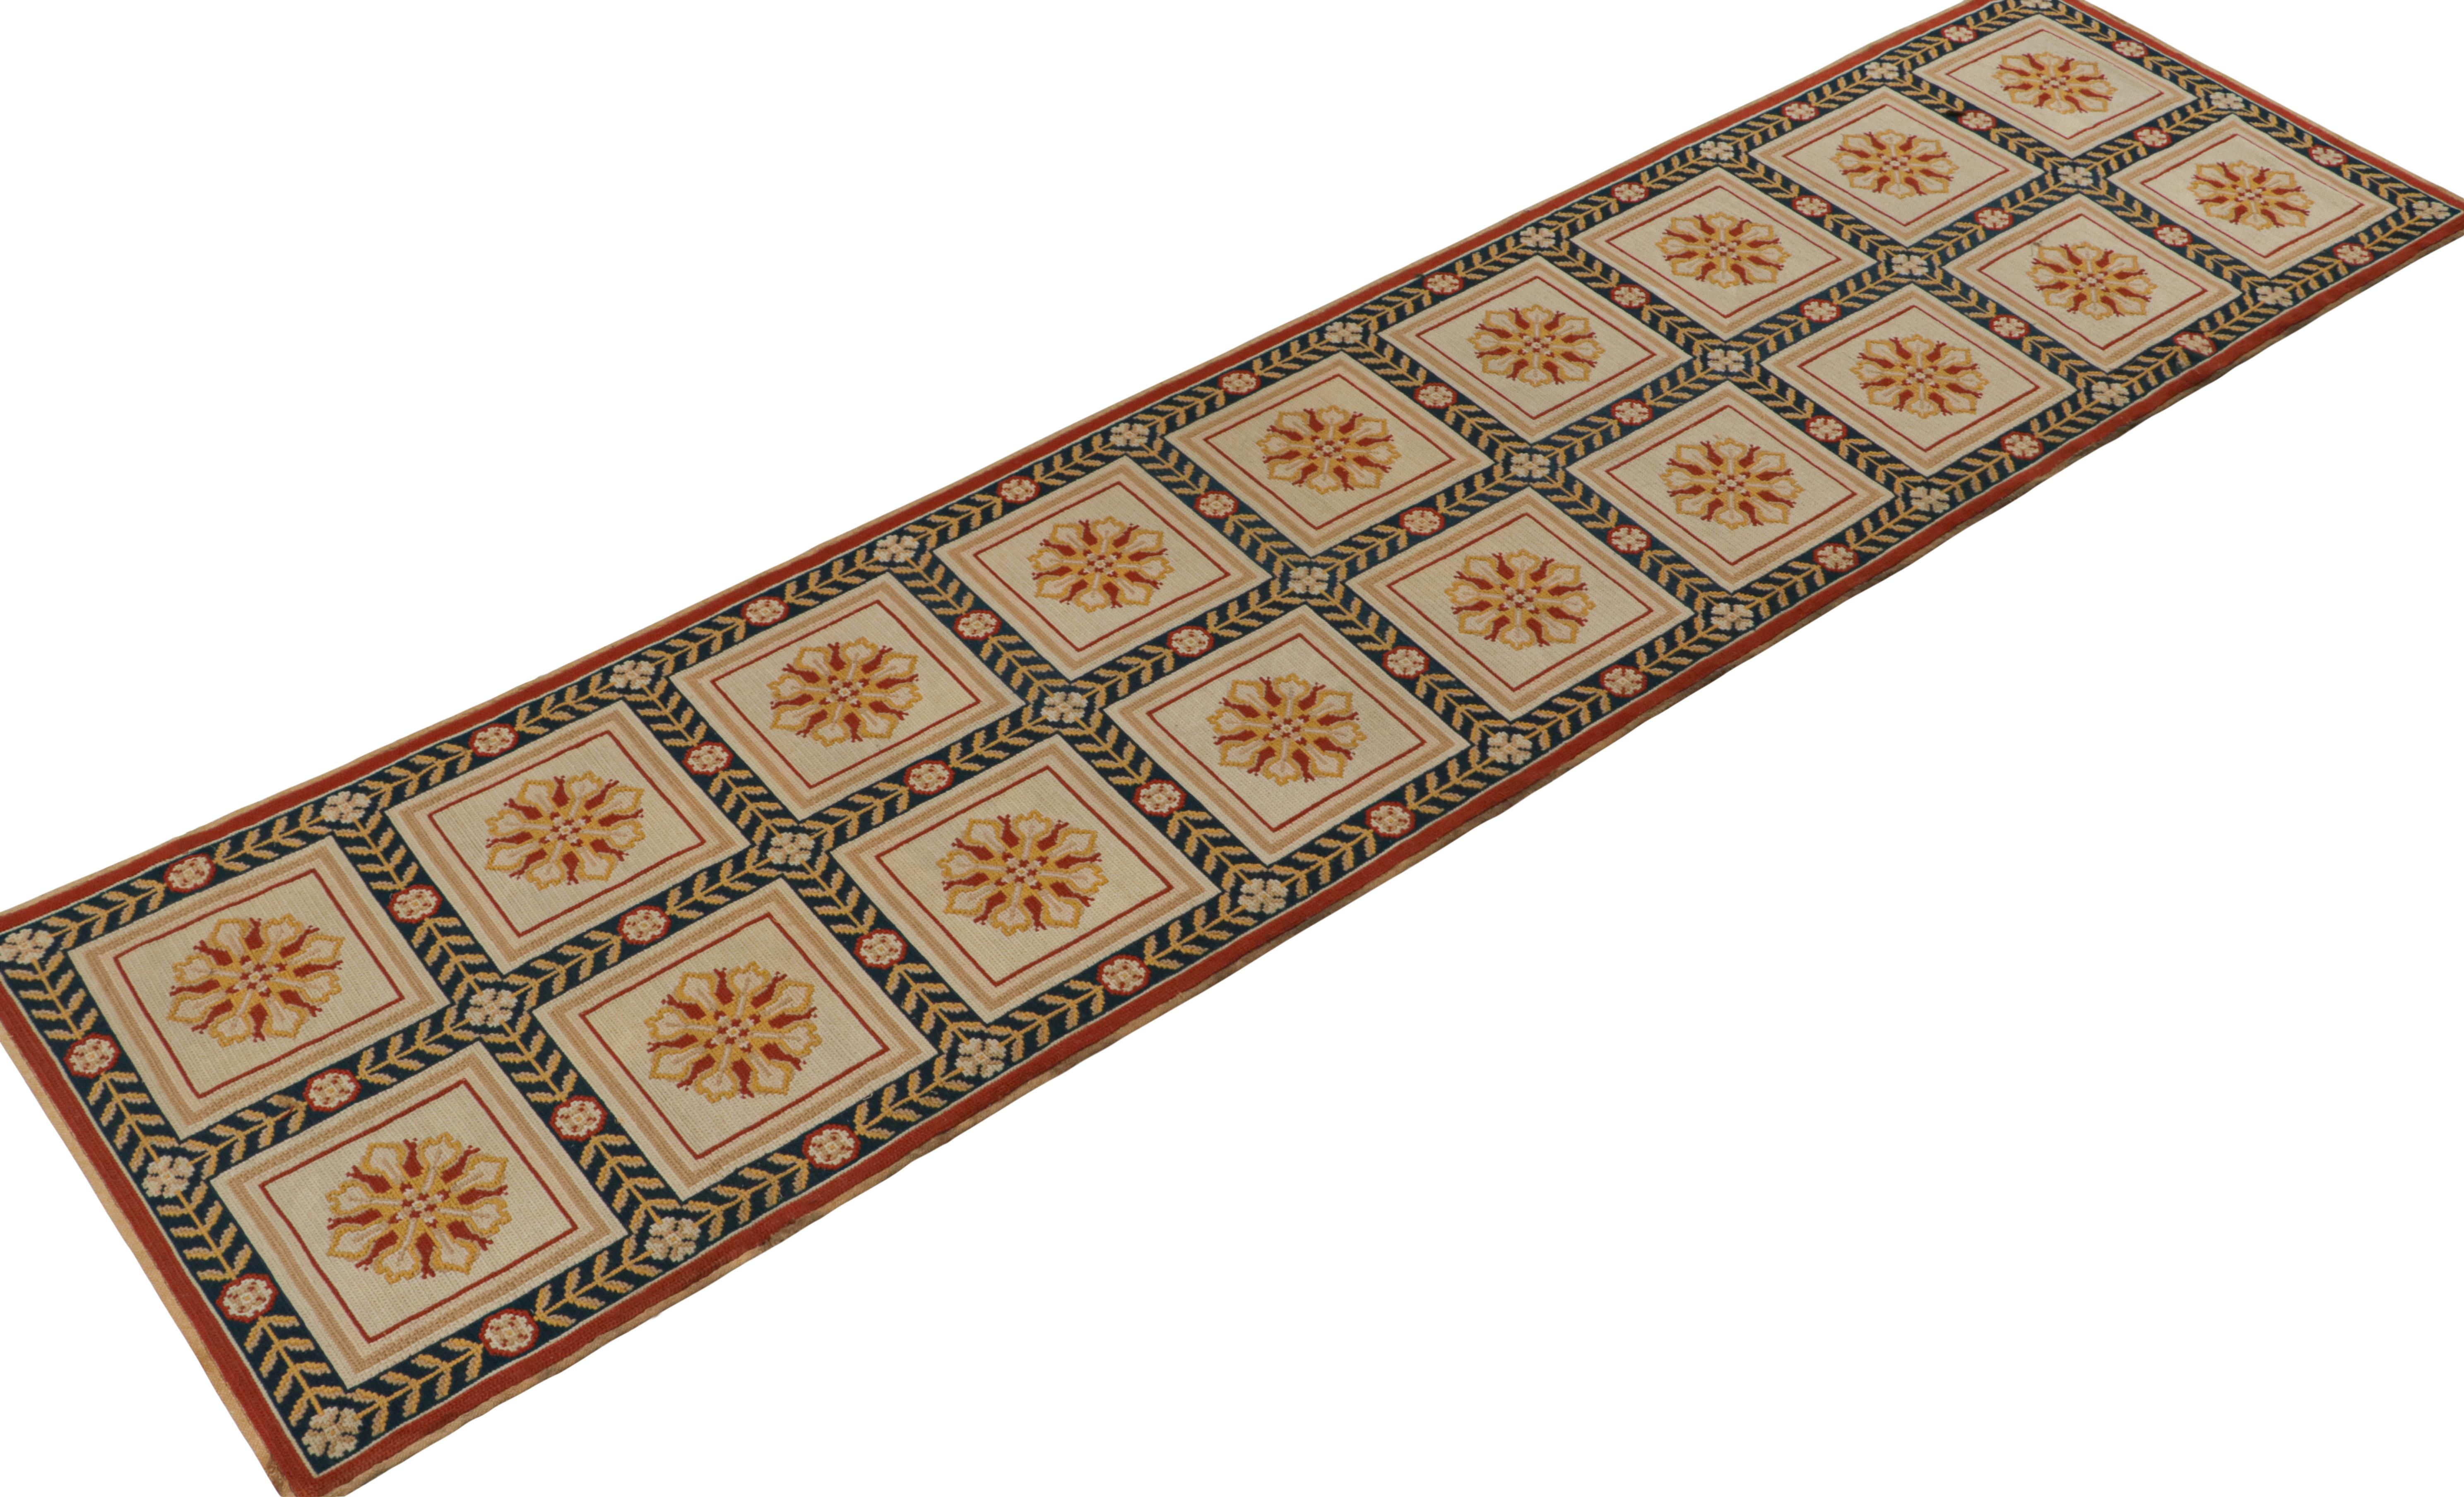 This pair of vintage 3x13 needlepoint runner is the next grand addition to Rug & Kilim’s repertoire of classic curations. Hand-knotted in wool.

Further on the Design: 

These 3x13 pieces are mid-century Portuguese runners from the famed Arraiolos